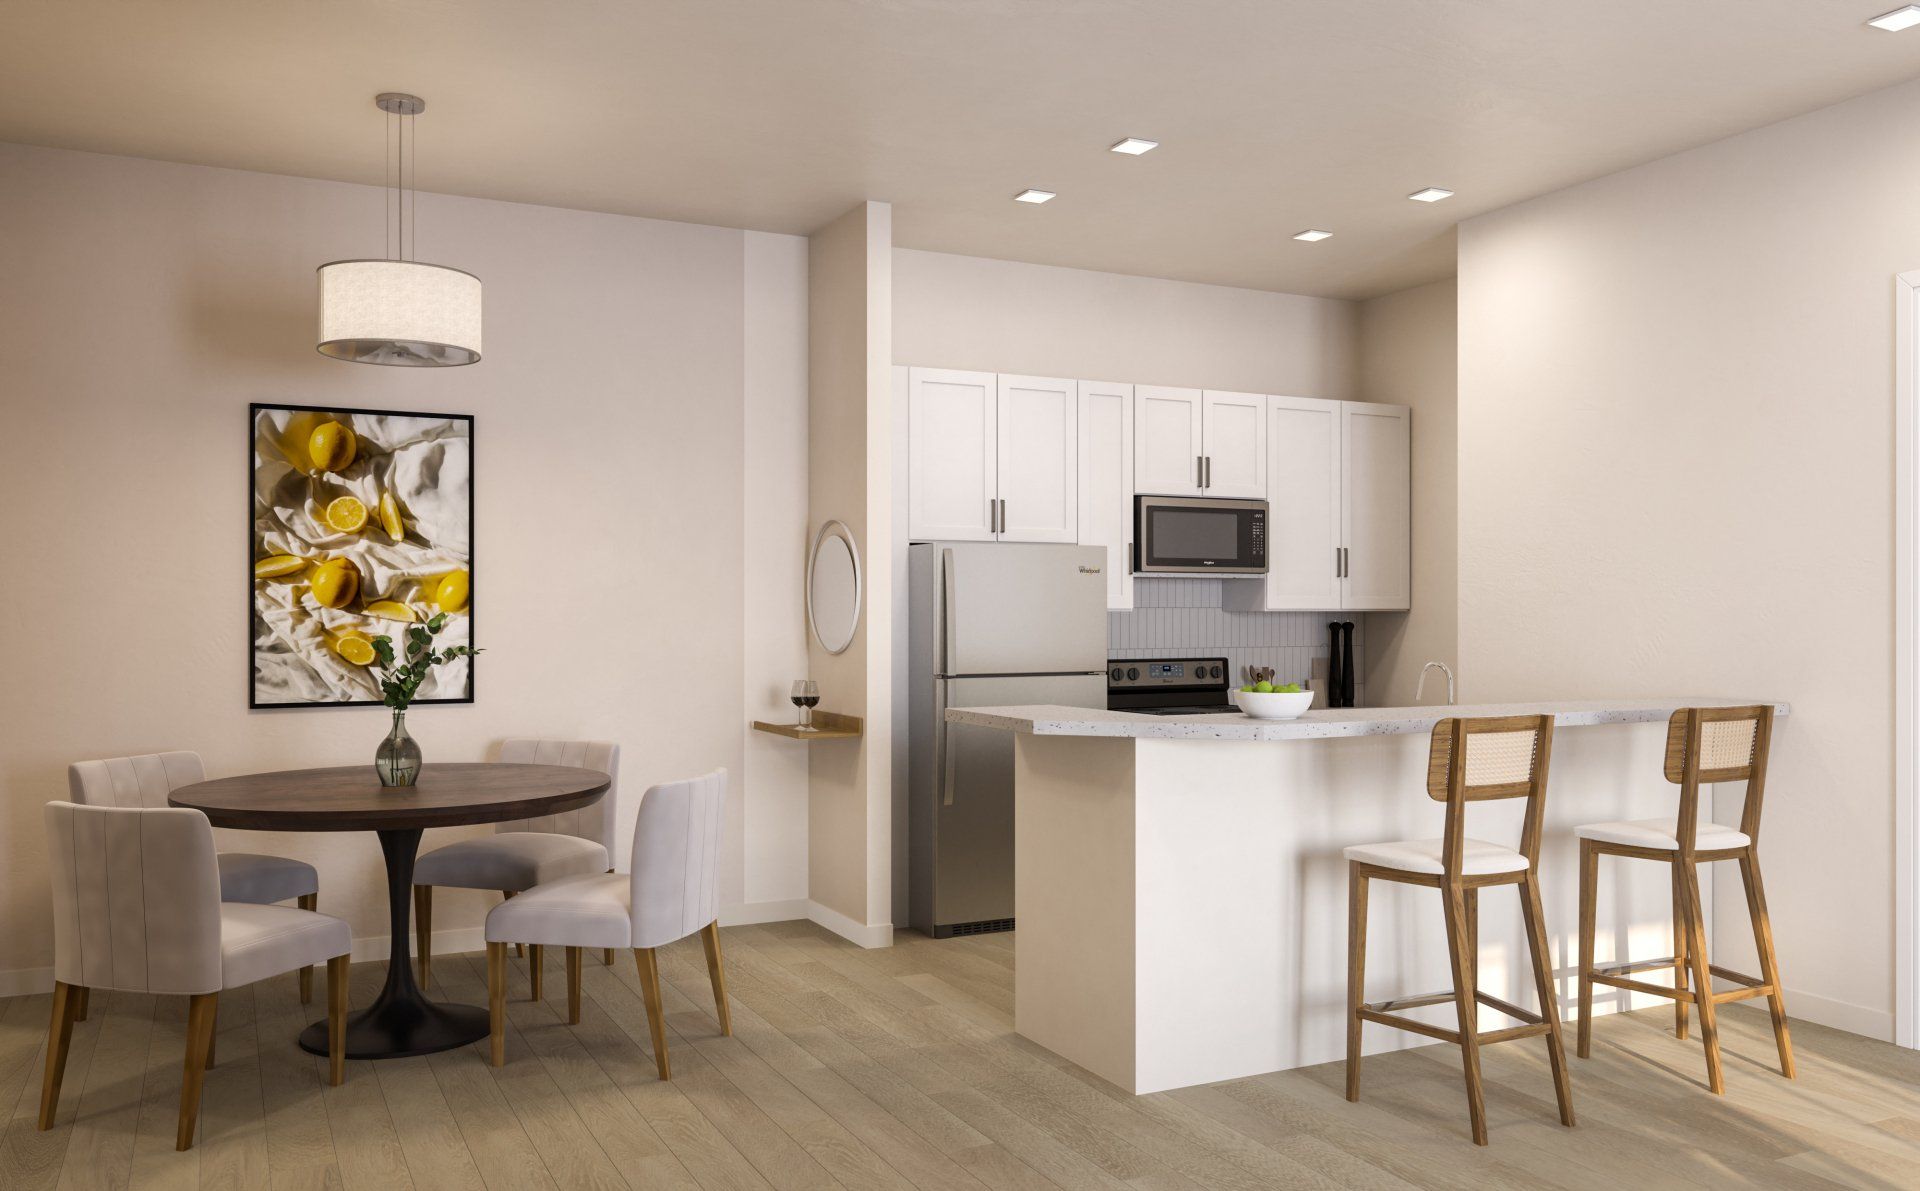 The Caroline kitchen and dining rendering